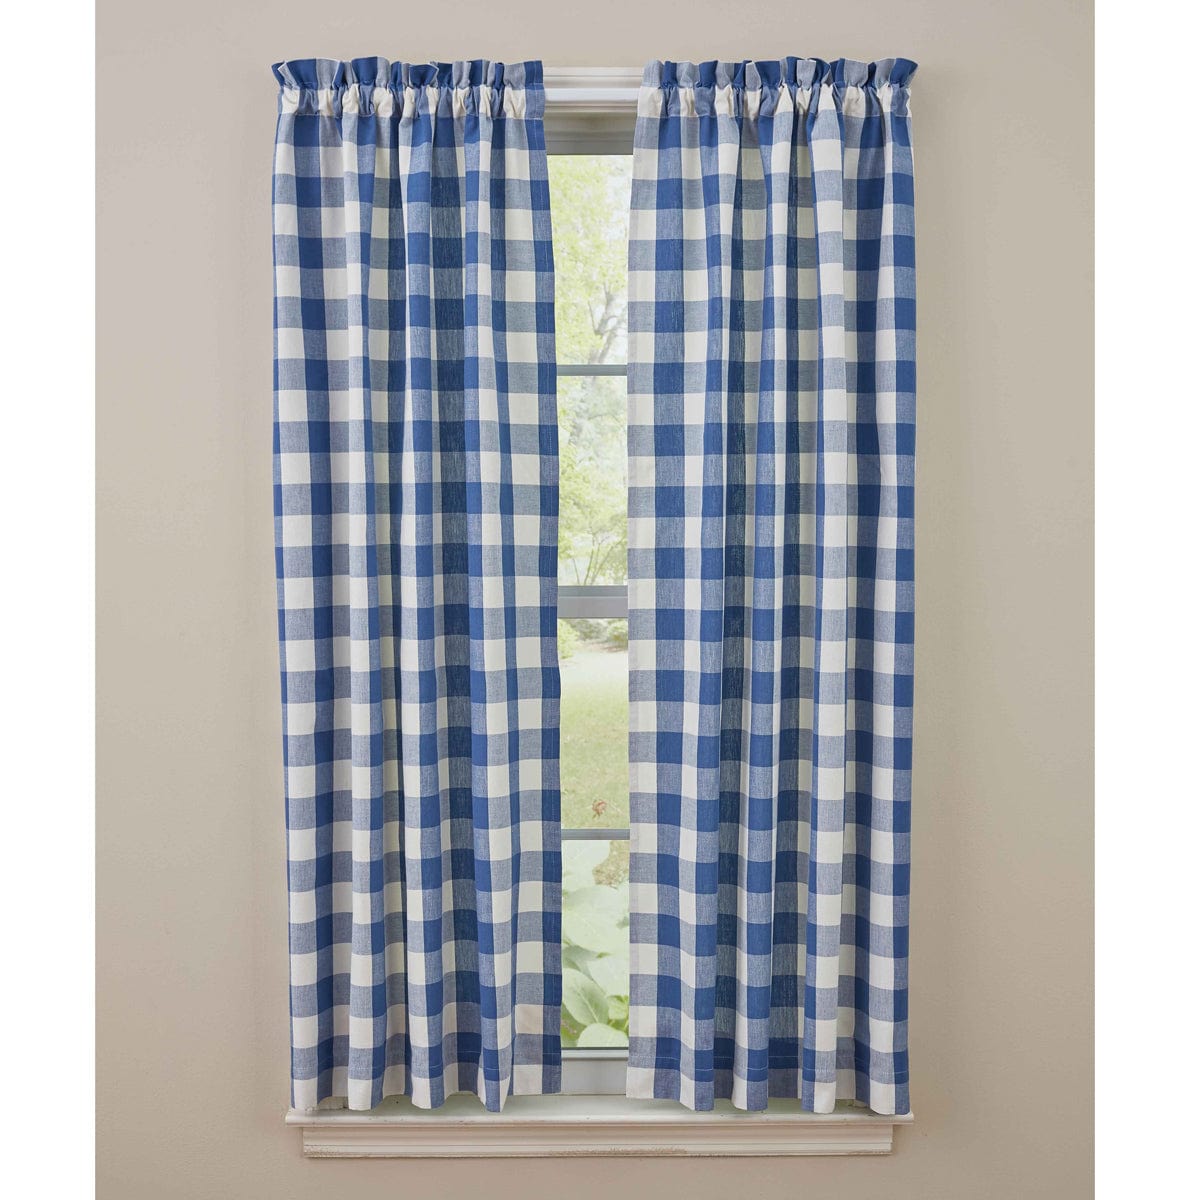 Wicklow Check in China Blue Panel Pair With Tie Backs 63" Long Unlined-Park Designs-The Village Merchant